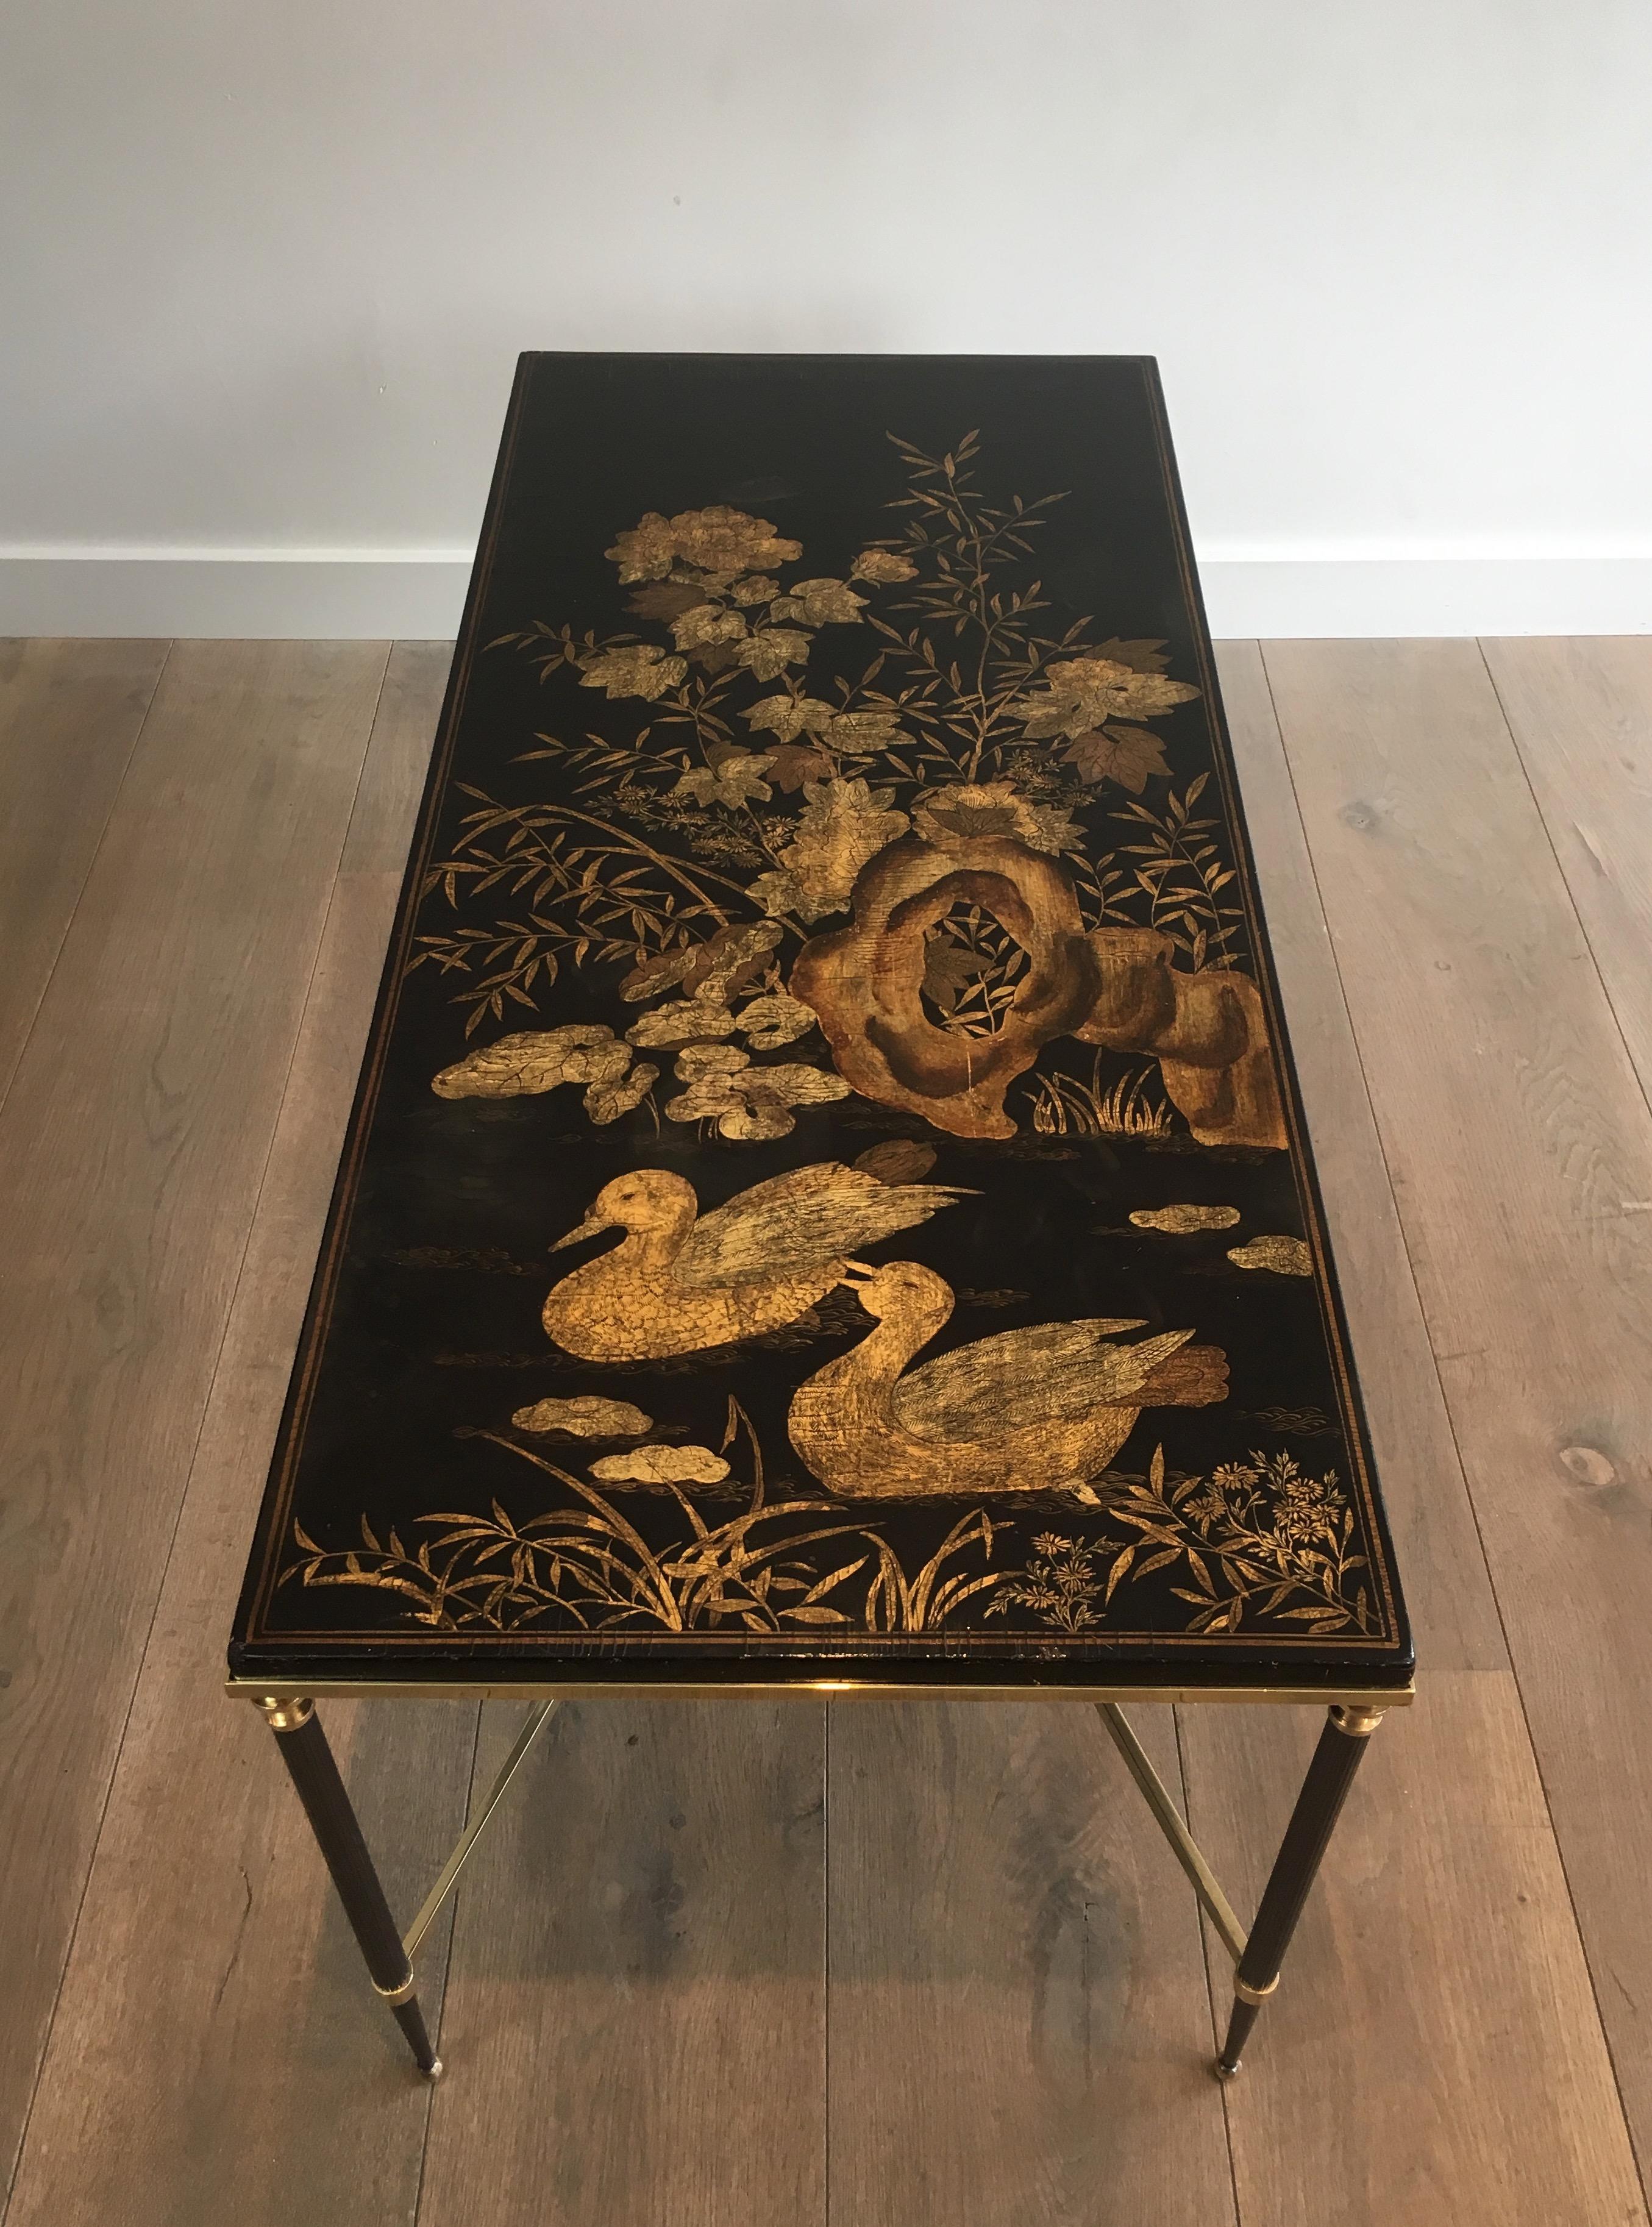 This beautiful neoclassical coffee table is made of a gun metal and brass base supporting a very nice black and gilt lacquered wooden top. This fine lacquered top showing two ducks swimming together in a gilt floral decor. This piece is a work by